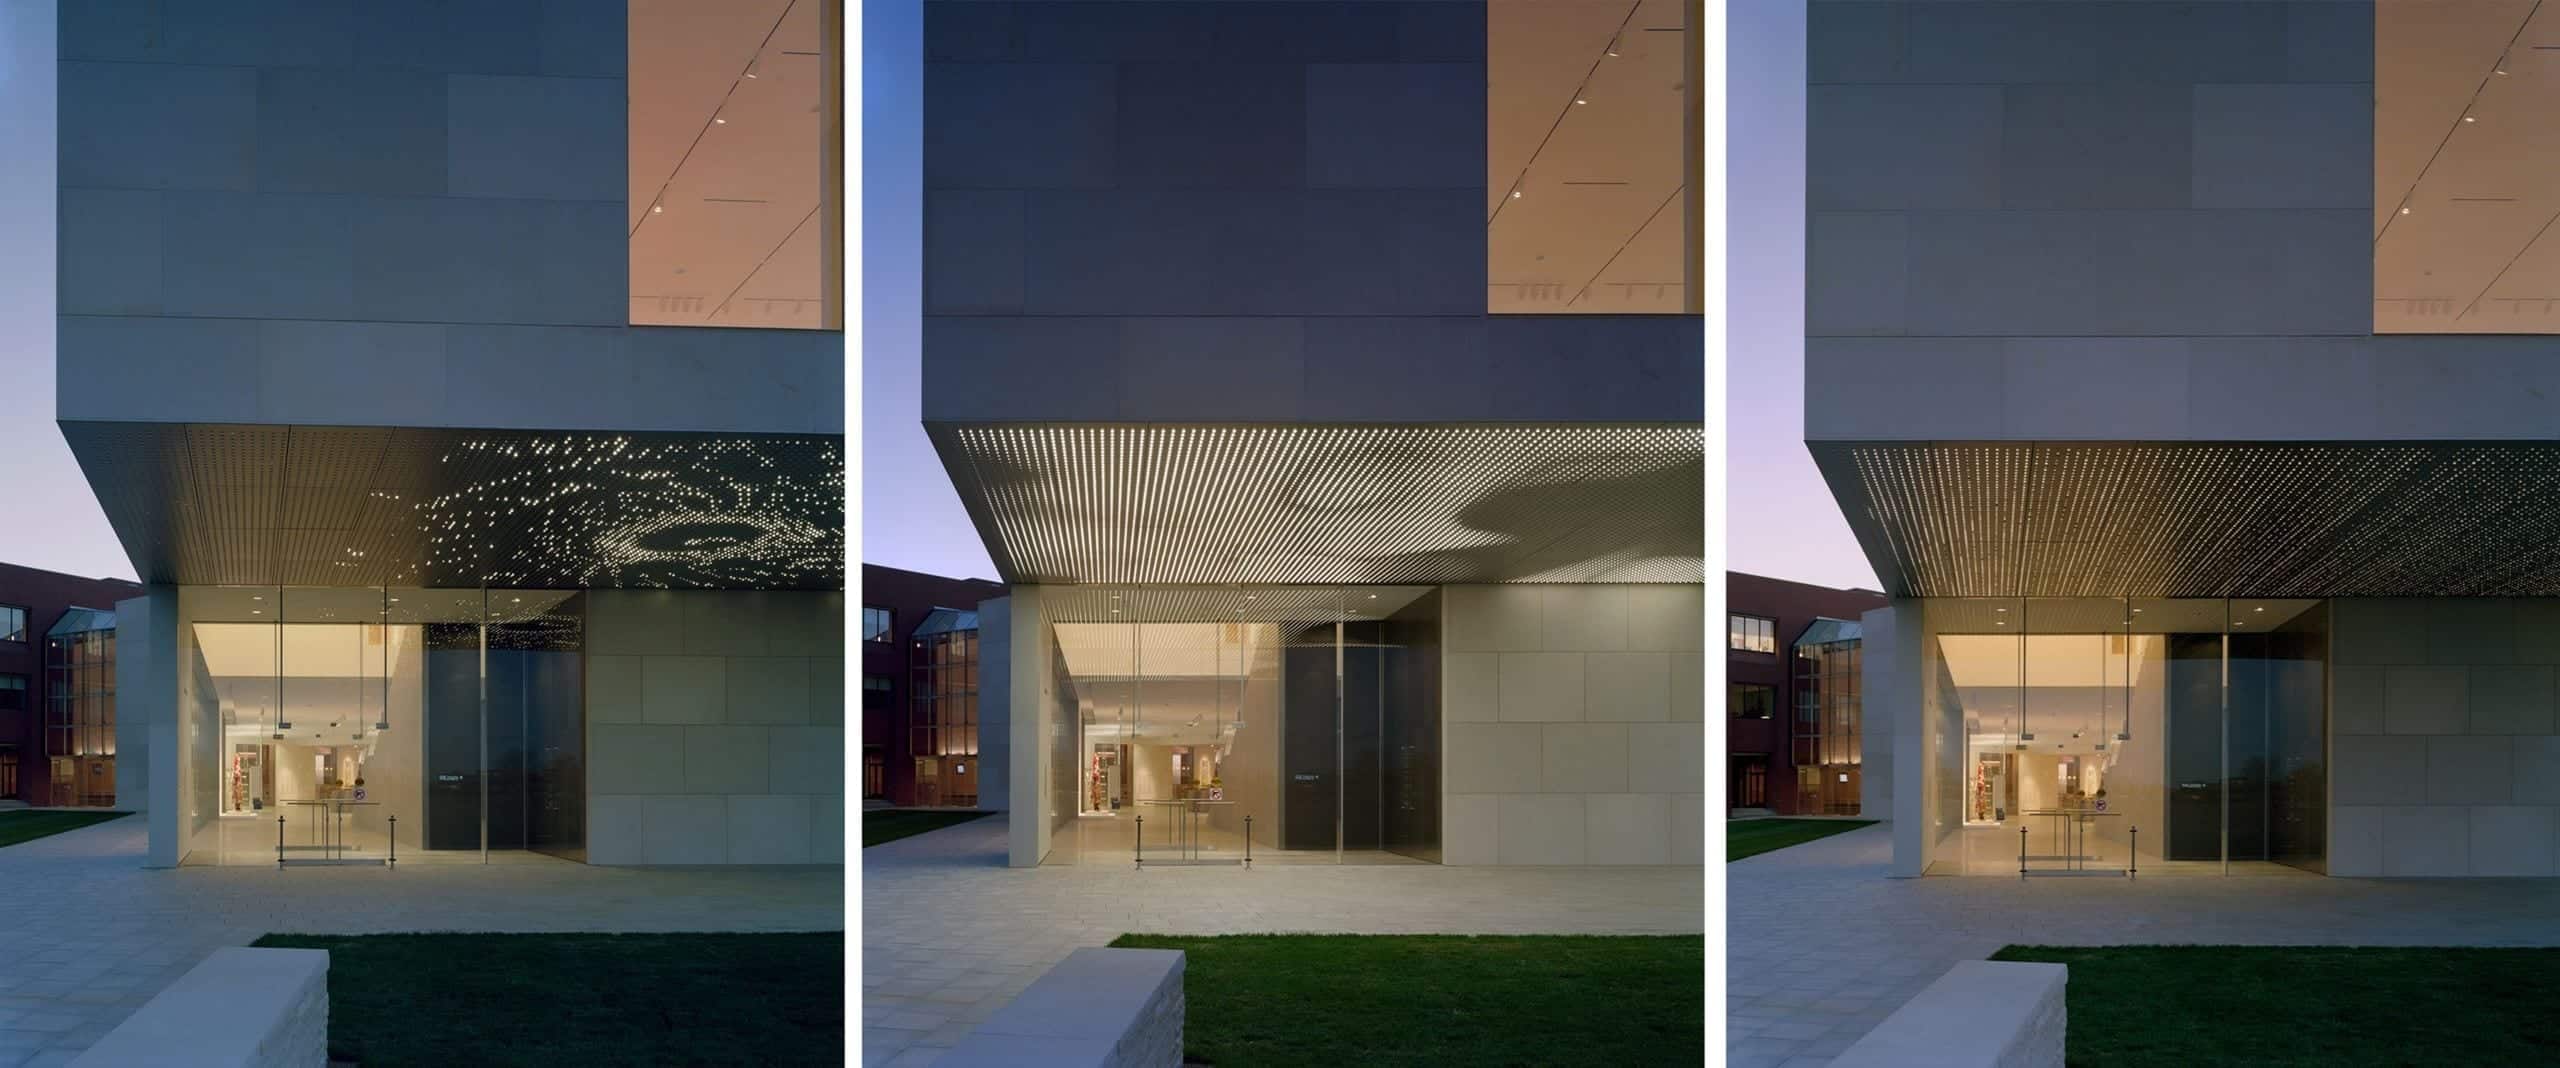 Photos of the kinetic light and soffit system developed for the Nerman Museum of Art.